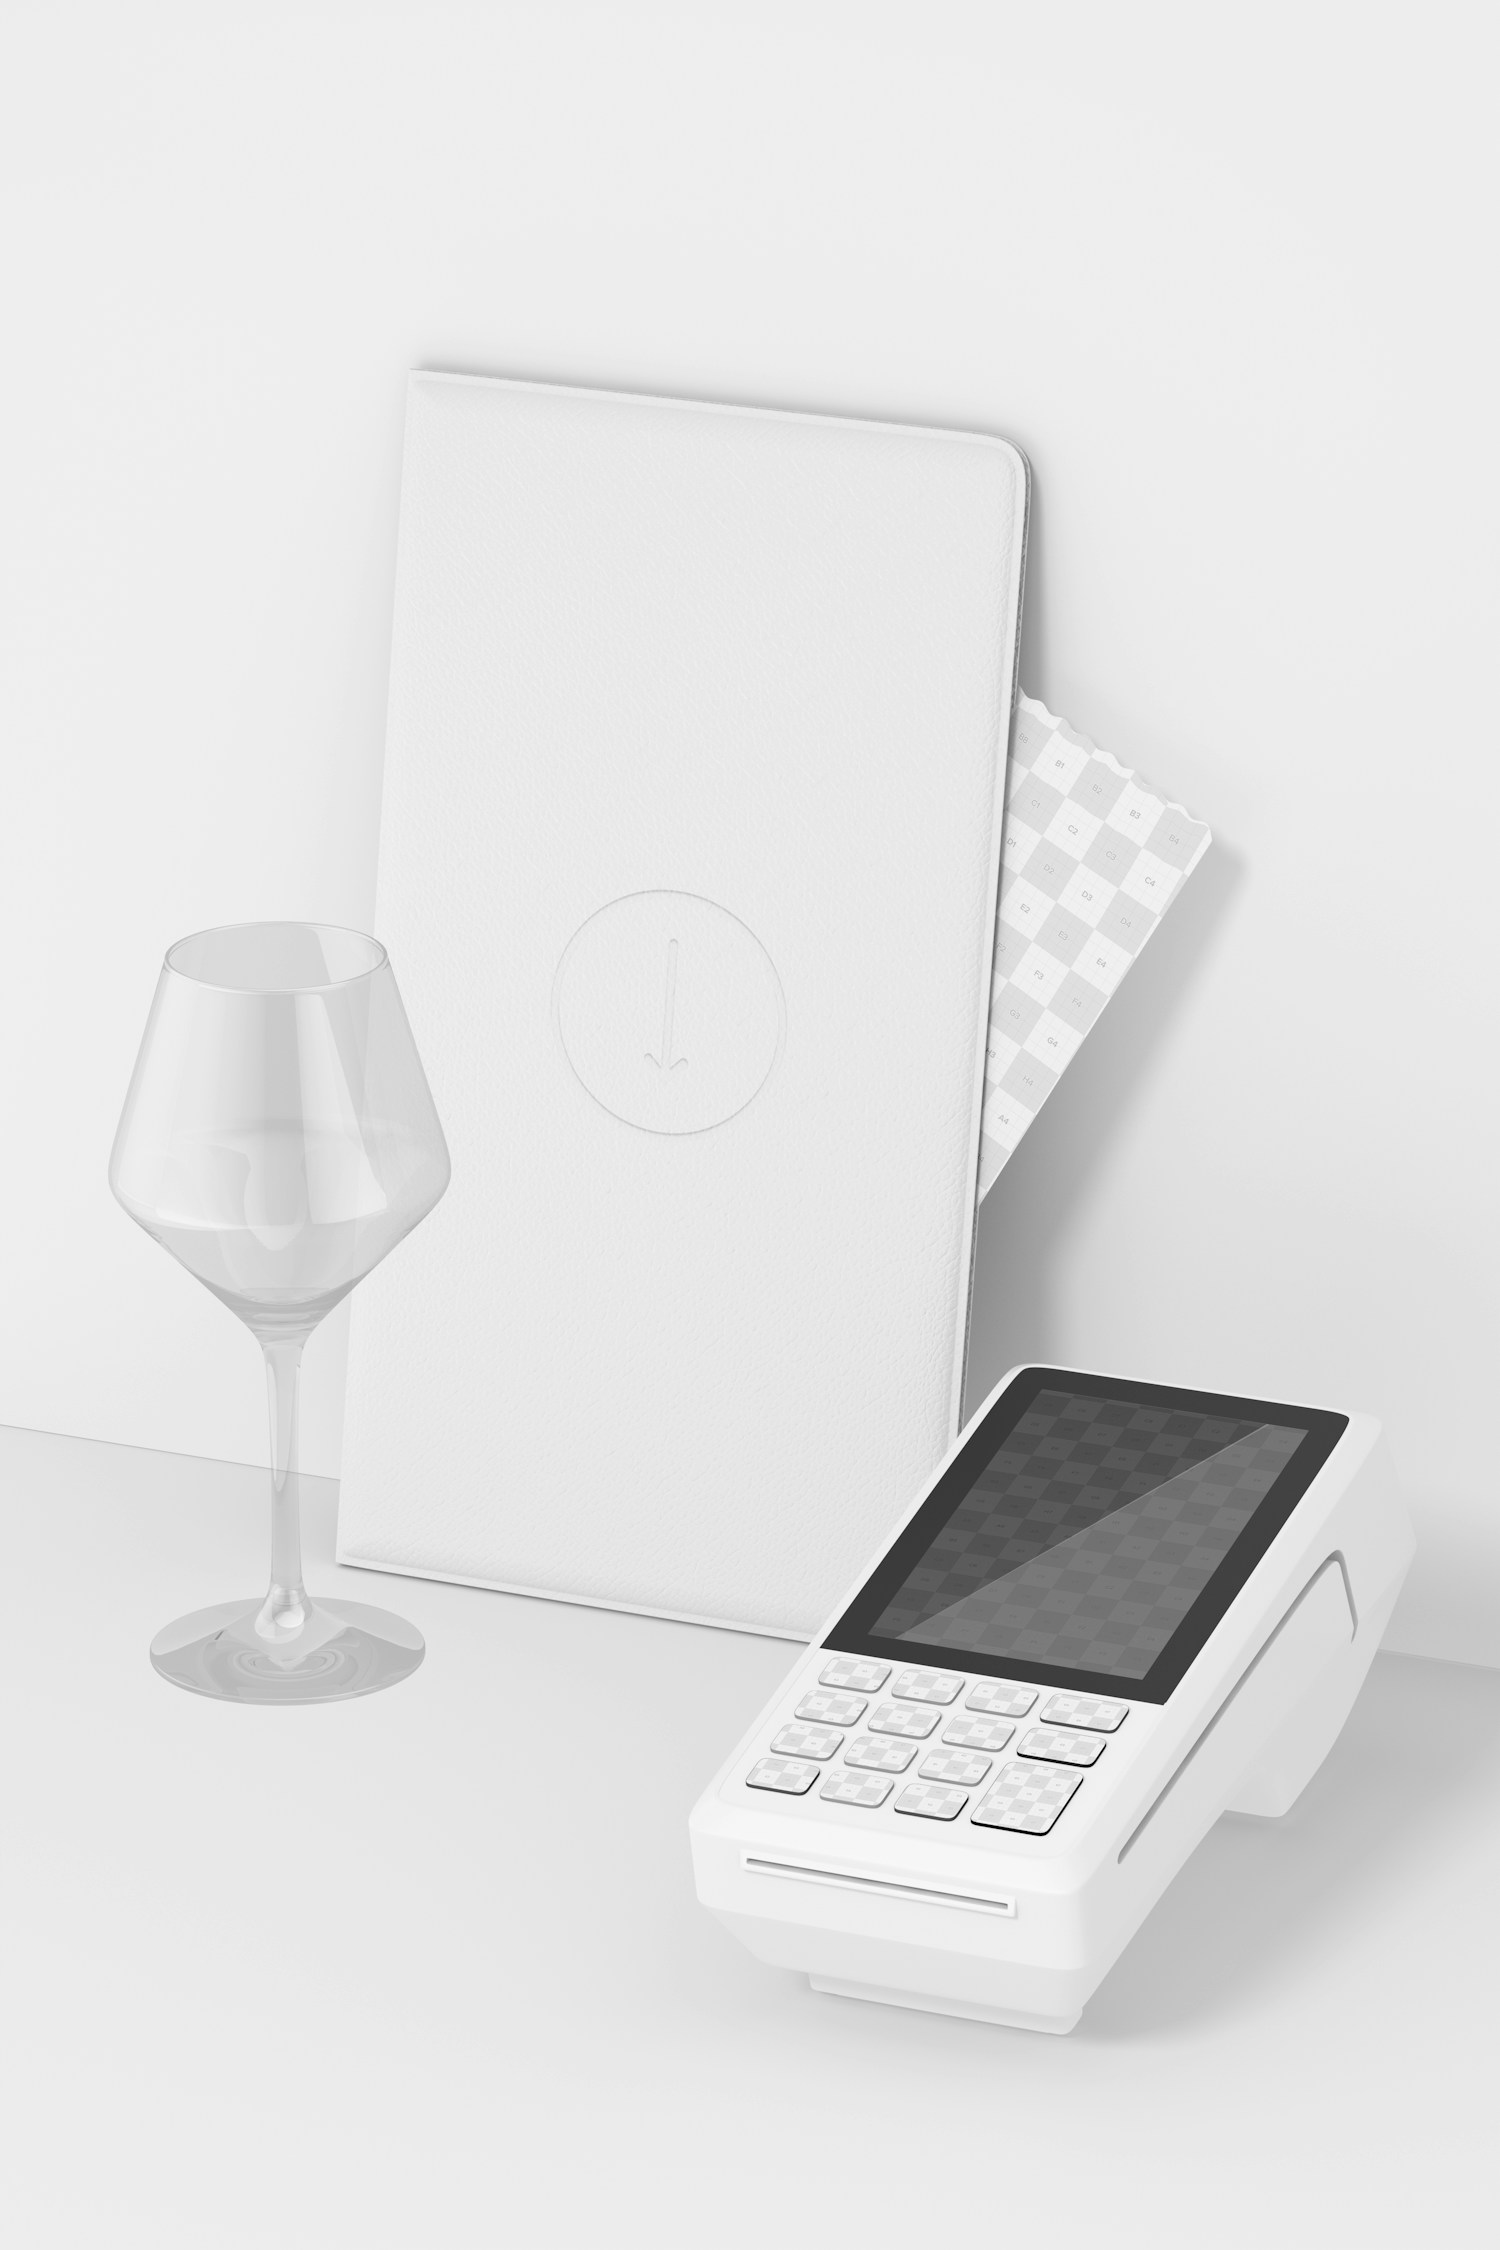 Payment Device on Bar Mockup, with Cup